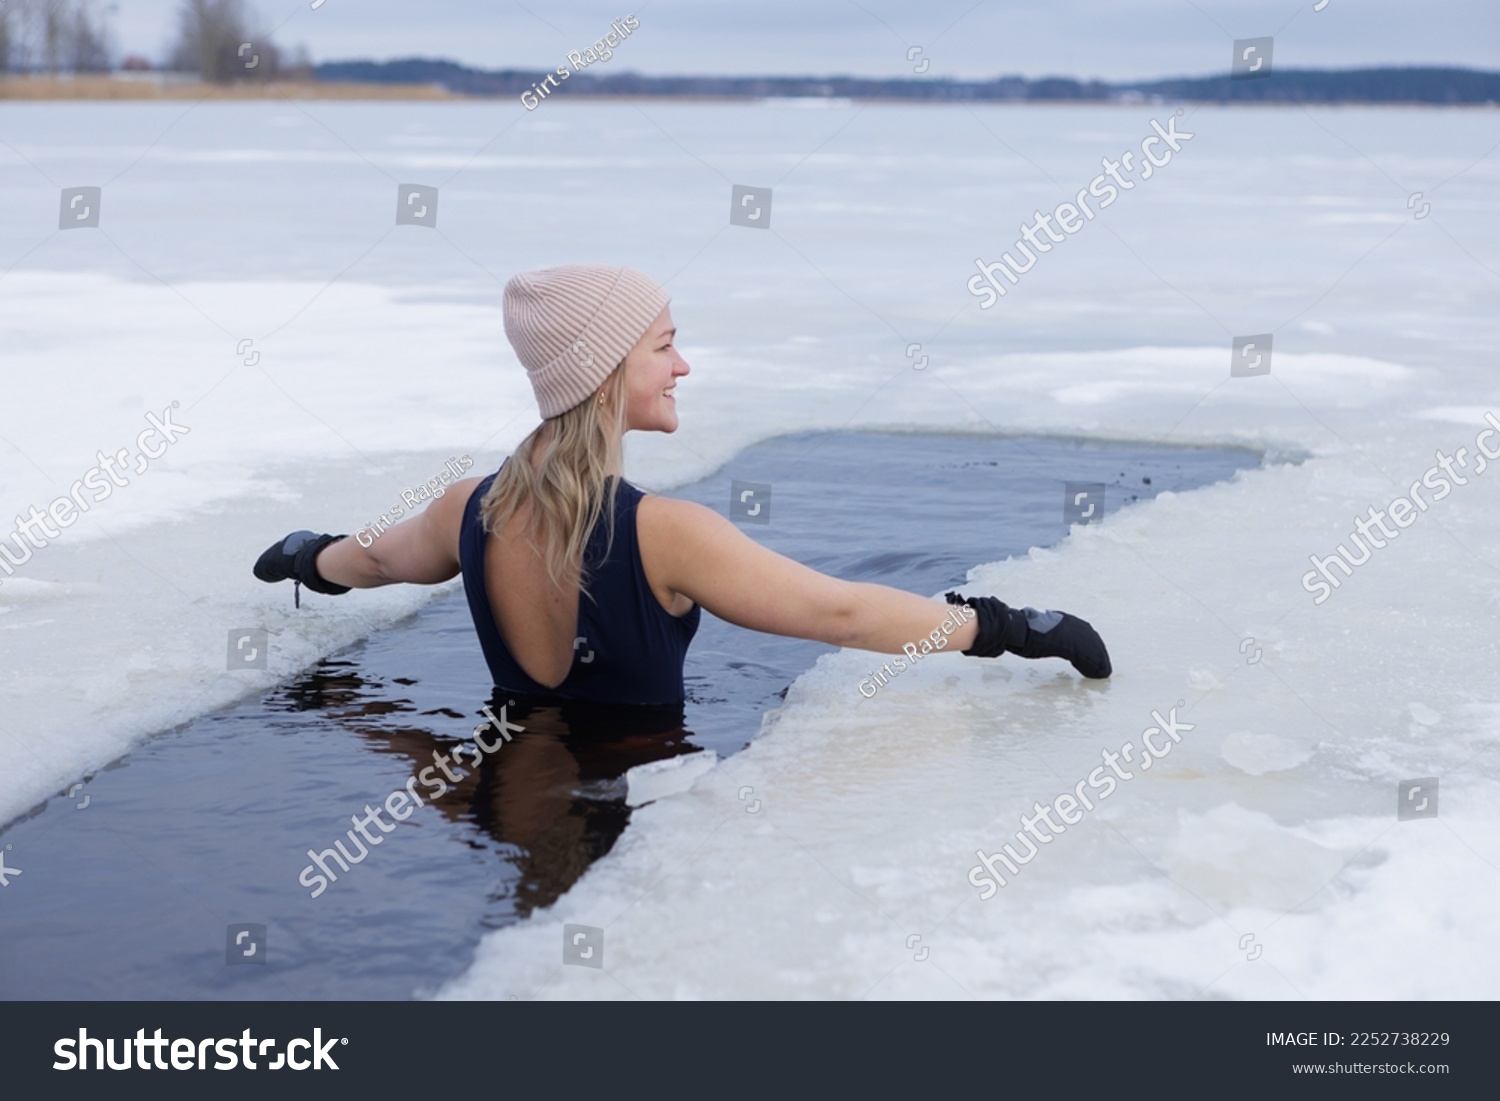 Winter swimming. Woman in frozen lake ice hole. Swimmers wellness in icy water. How to swim in cold water. Beautiful young female in zen meditation. Gray hat and gloves swimming clothes. Nature lake #2252738229